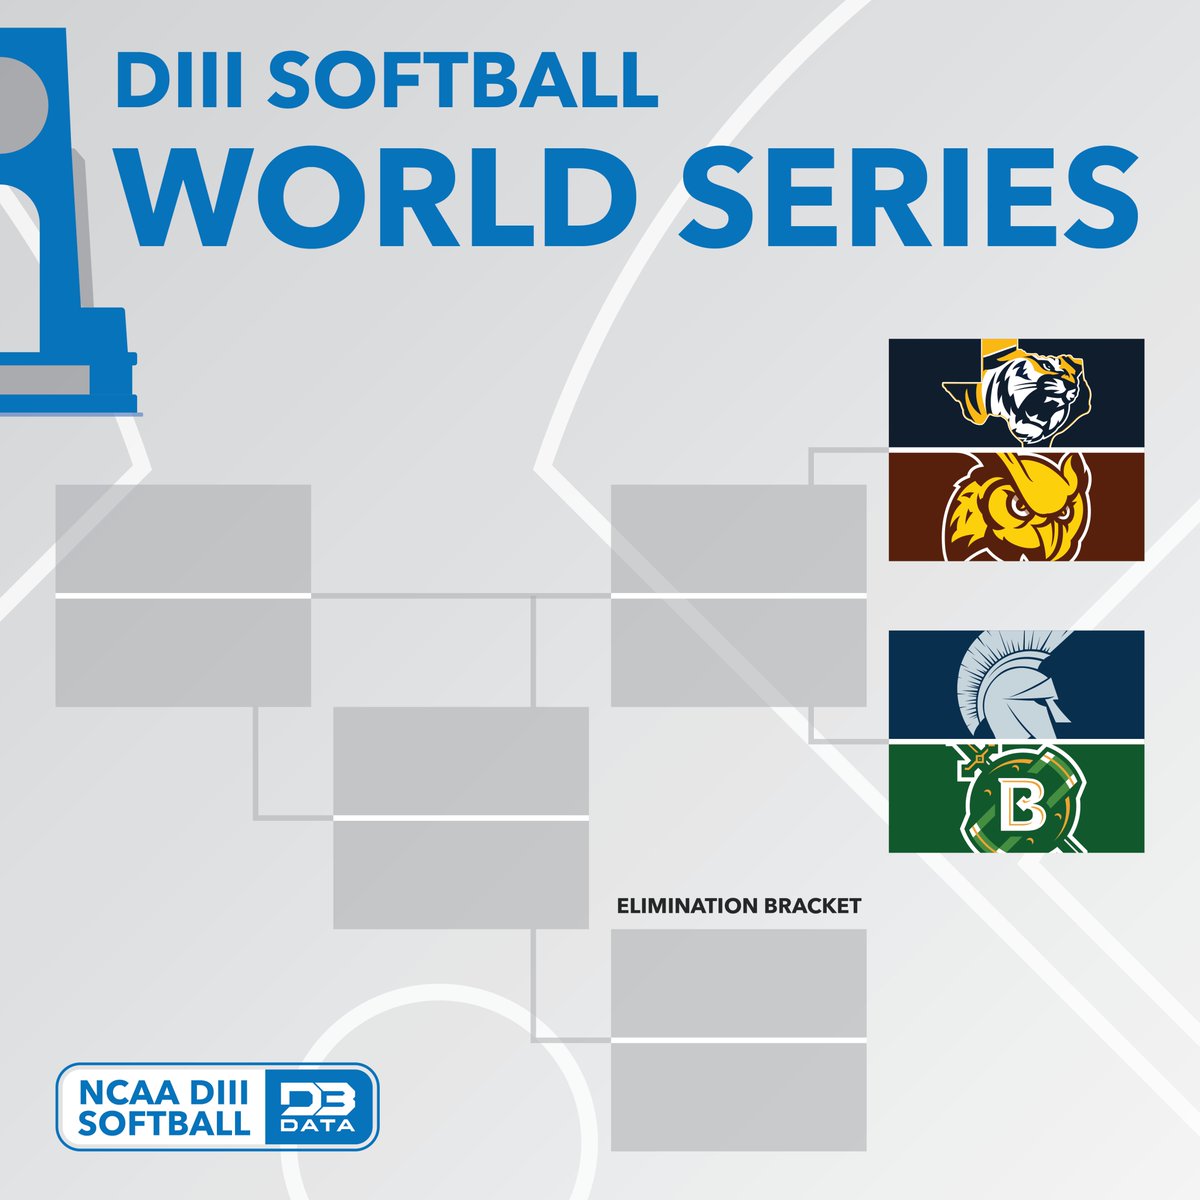 Just 8 teams remain. It's time for the DIII Softball World Series. #d3data #d3 #d3sports #d3softball